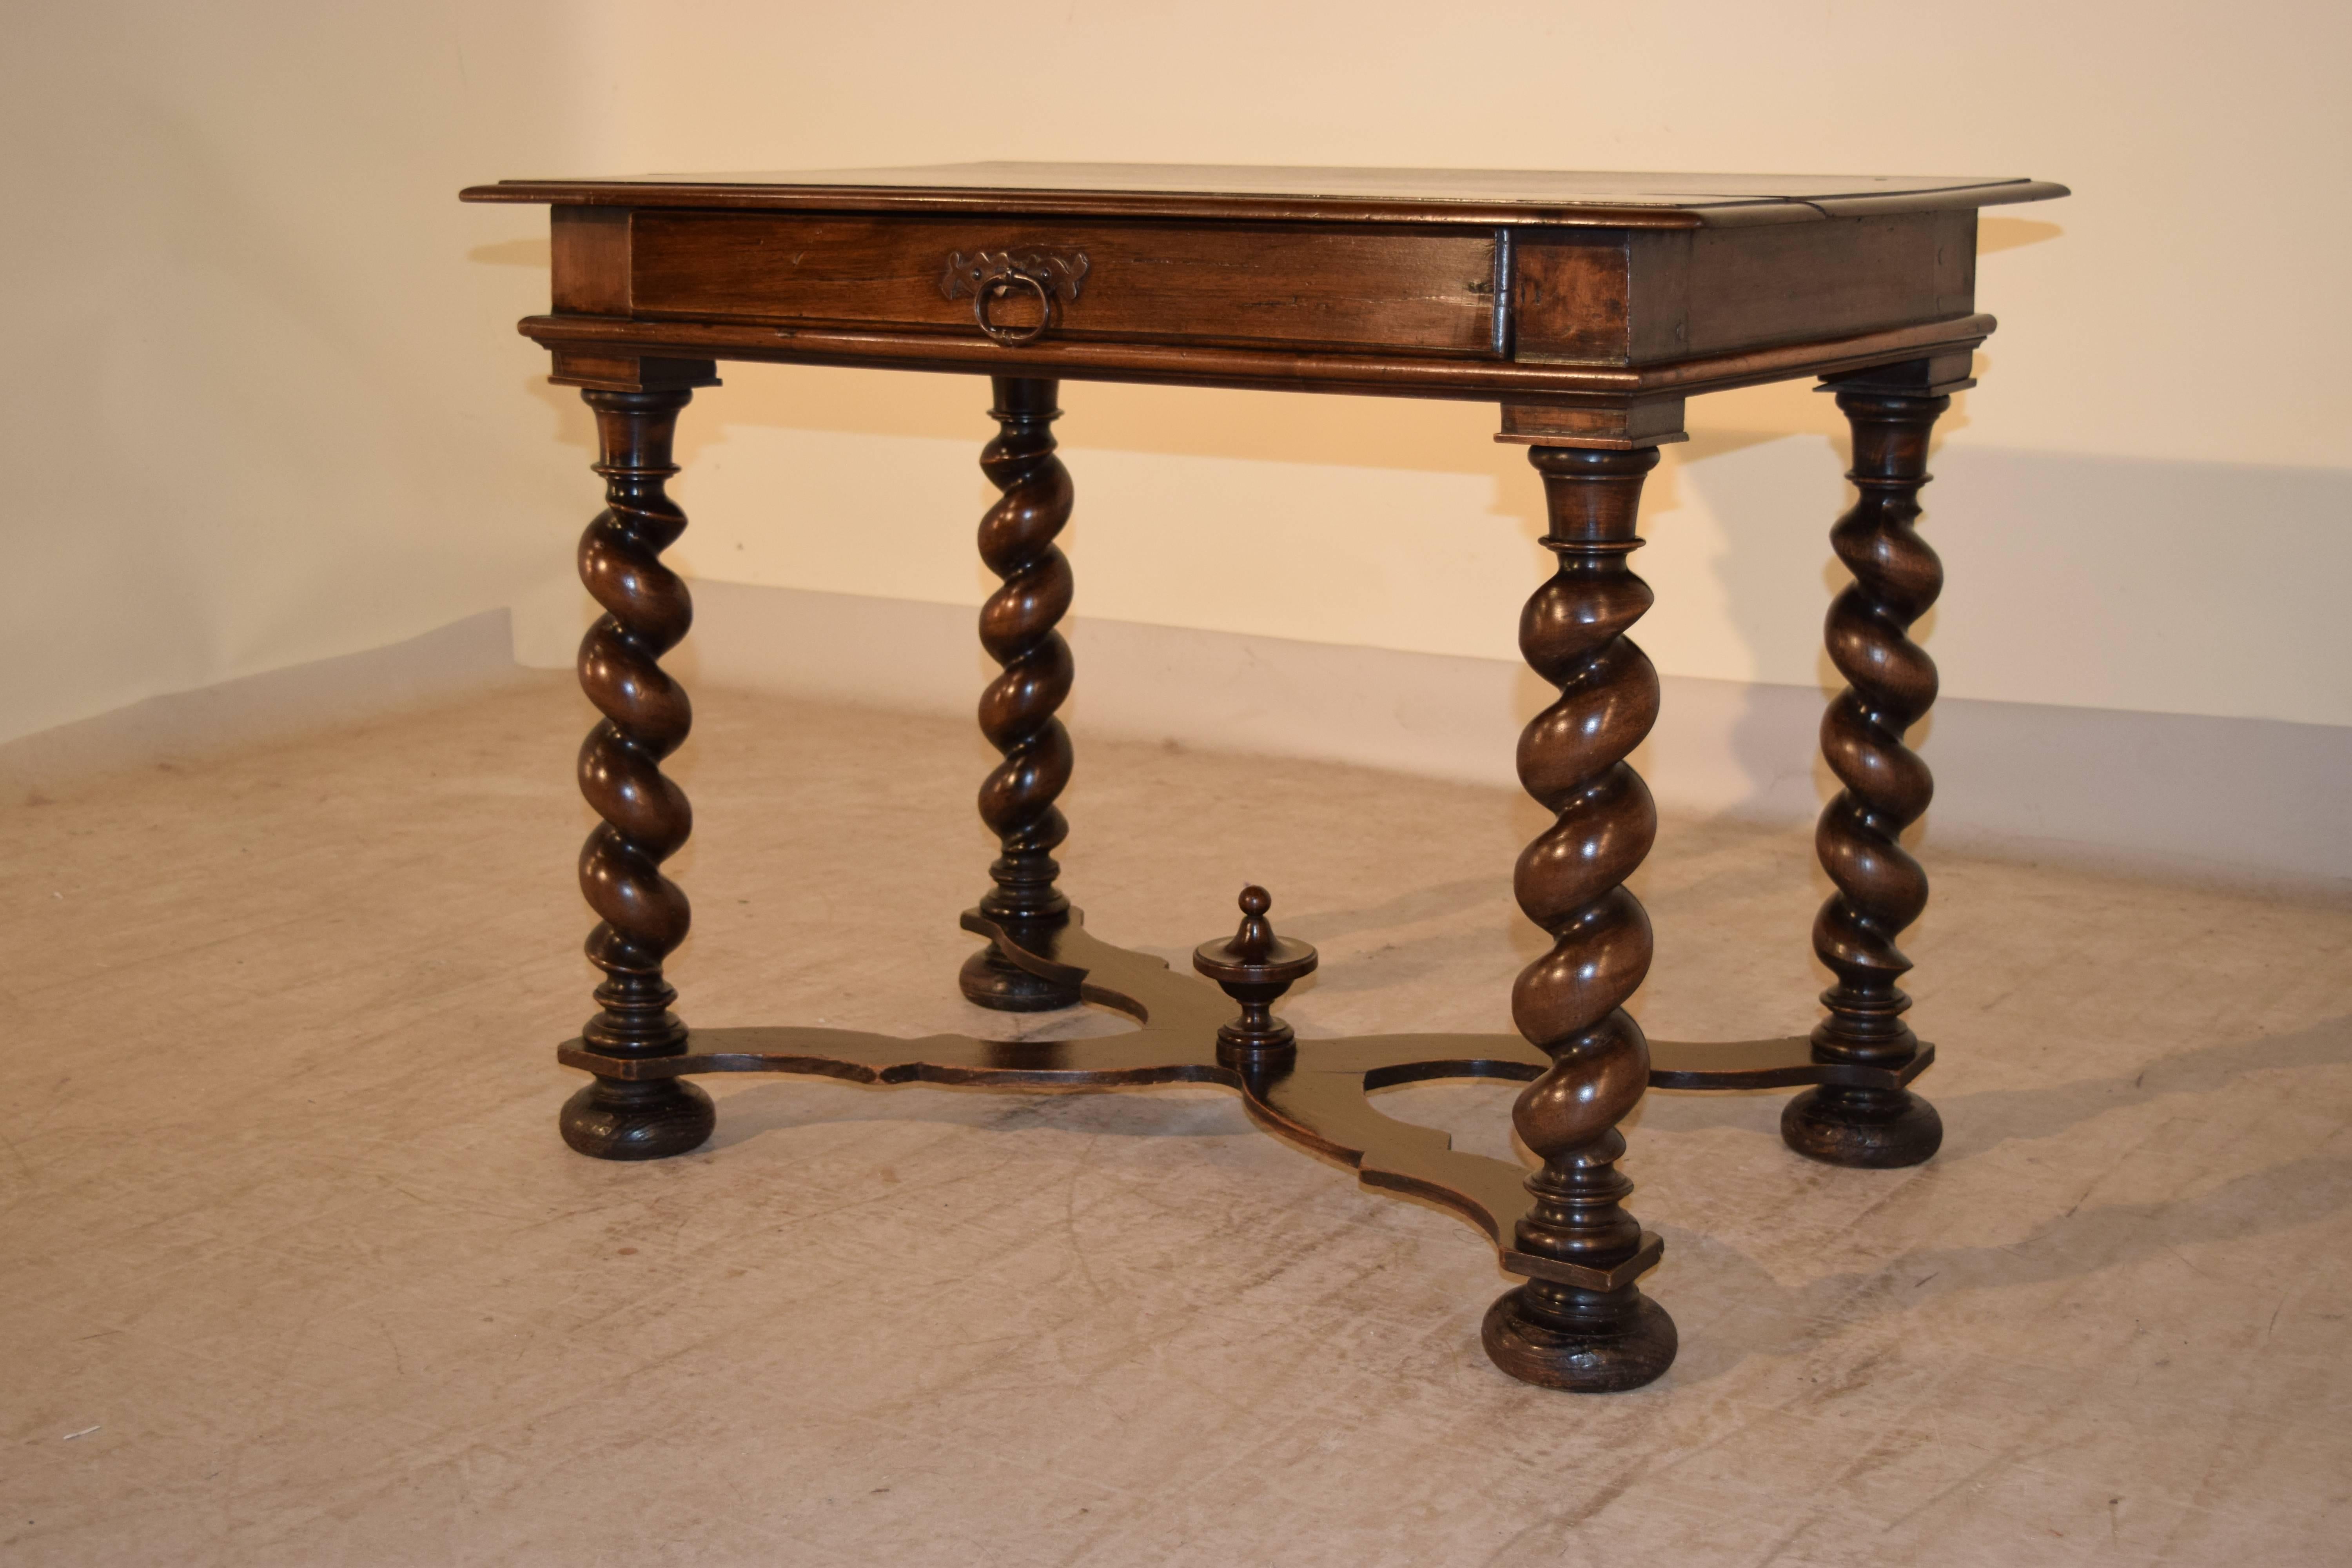 Late 18th century walnut side table from France. The top is beautifully grained and has a bevelled edge, following down to a simple apron and a single drawer in the front, supported on hand-turned barley twist legs, joined by serpentine cross